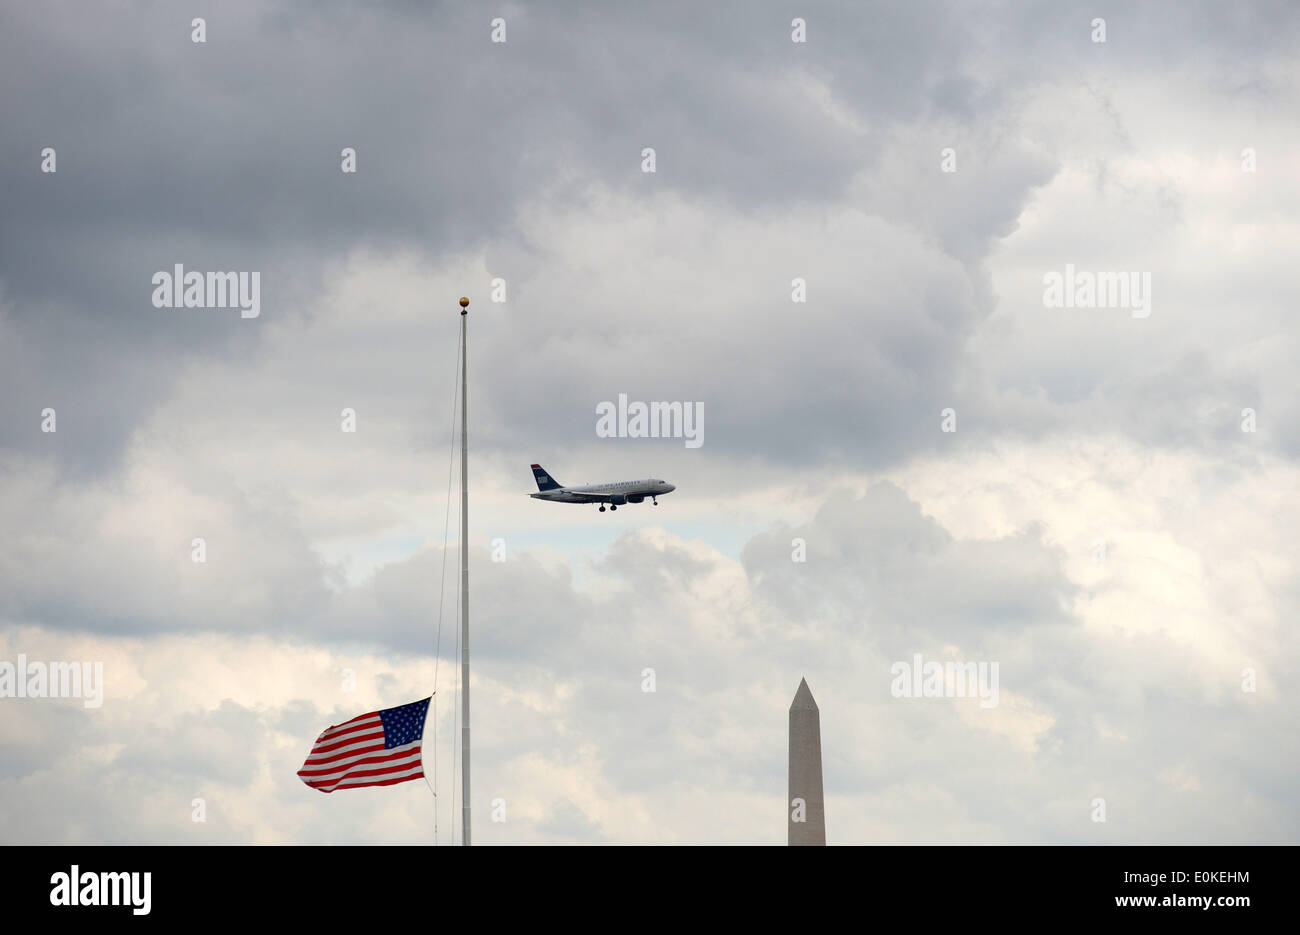 Peace Officers Memorial Day Background Stock Photo by ©tharun15 46030677